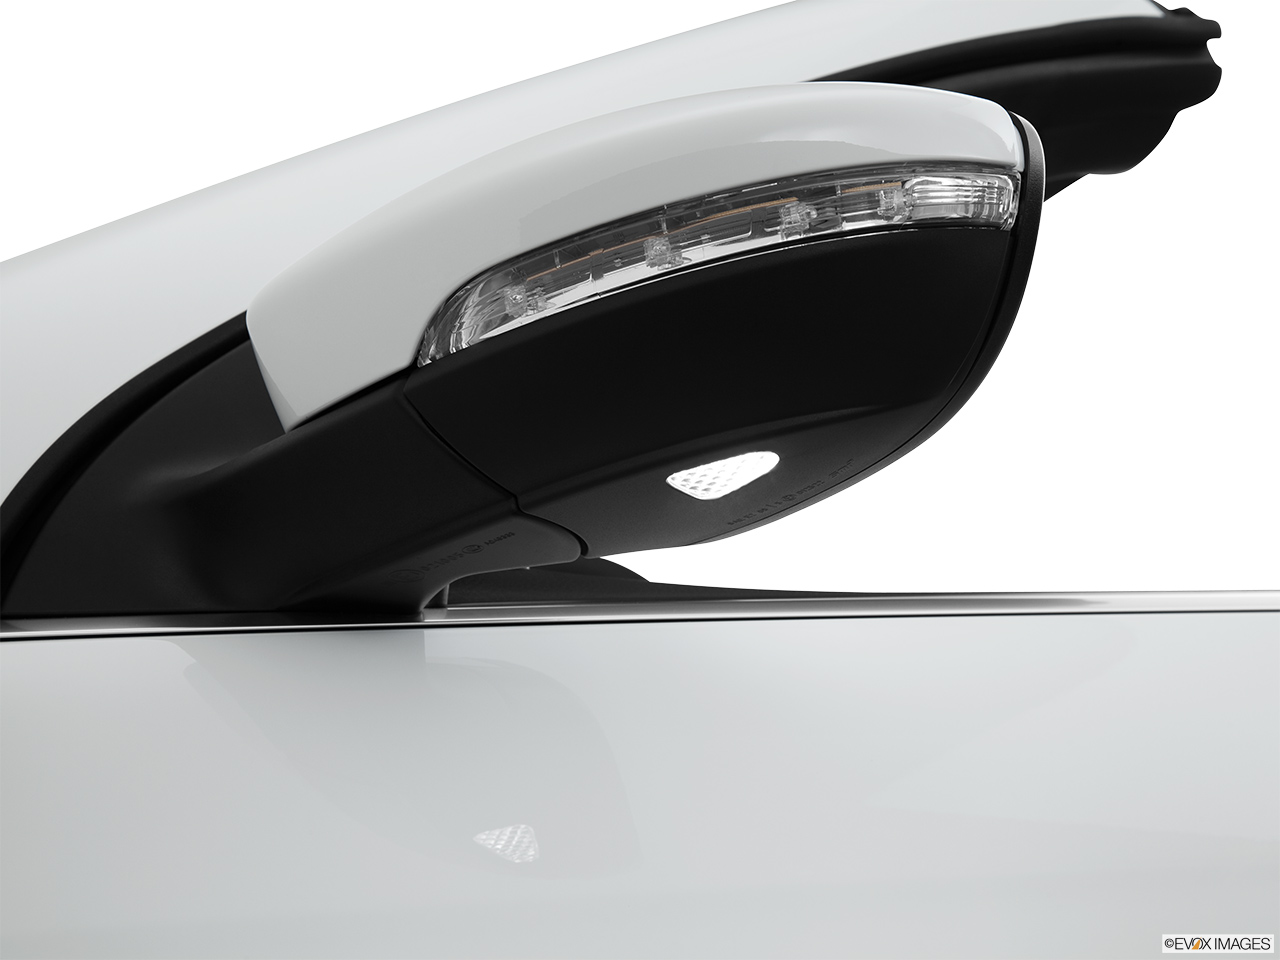 2013 Volkswagen Eos Lux Driver's side puddle lamp, illuminated 